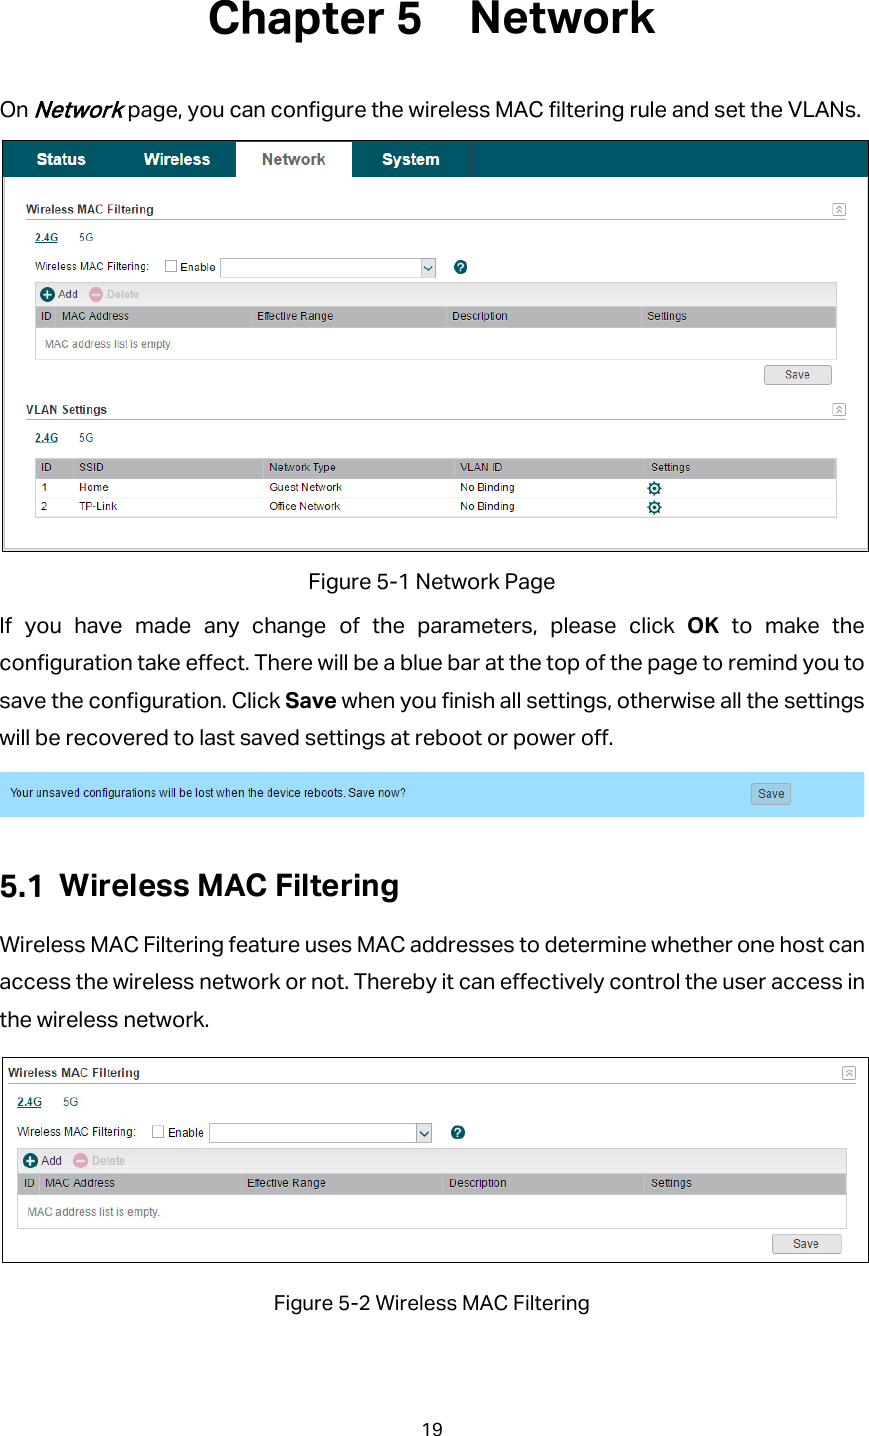  Network On Network page, you can configure the wireless MAC filtering rule and set the VLANs.  Figure 5-1 Network Page If you have made any change of the parameters, please click OK  to make the configuration take effect. There will be a blue bar at the top of the page to remind you to save the configuration. Click Save when you finish all settings, otherwise all the settings will be recovered to last saved settings at reboot or power off.   Wireless MAC Filtering Wireless MAC Filtering feature uses MAC addresses to determine whether one host can access the wireless network or not. Thereby it can effectively control the user access in the wireless network.  Figure 5-2 Wireless MAC Filtering 19  